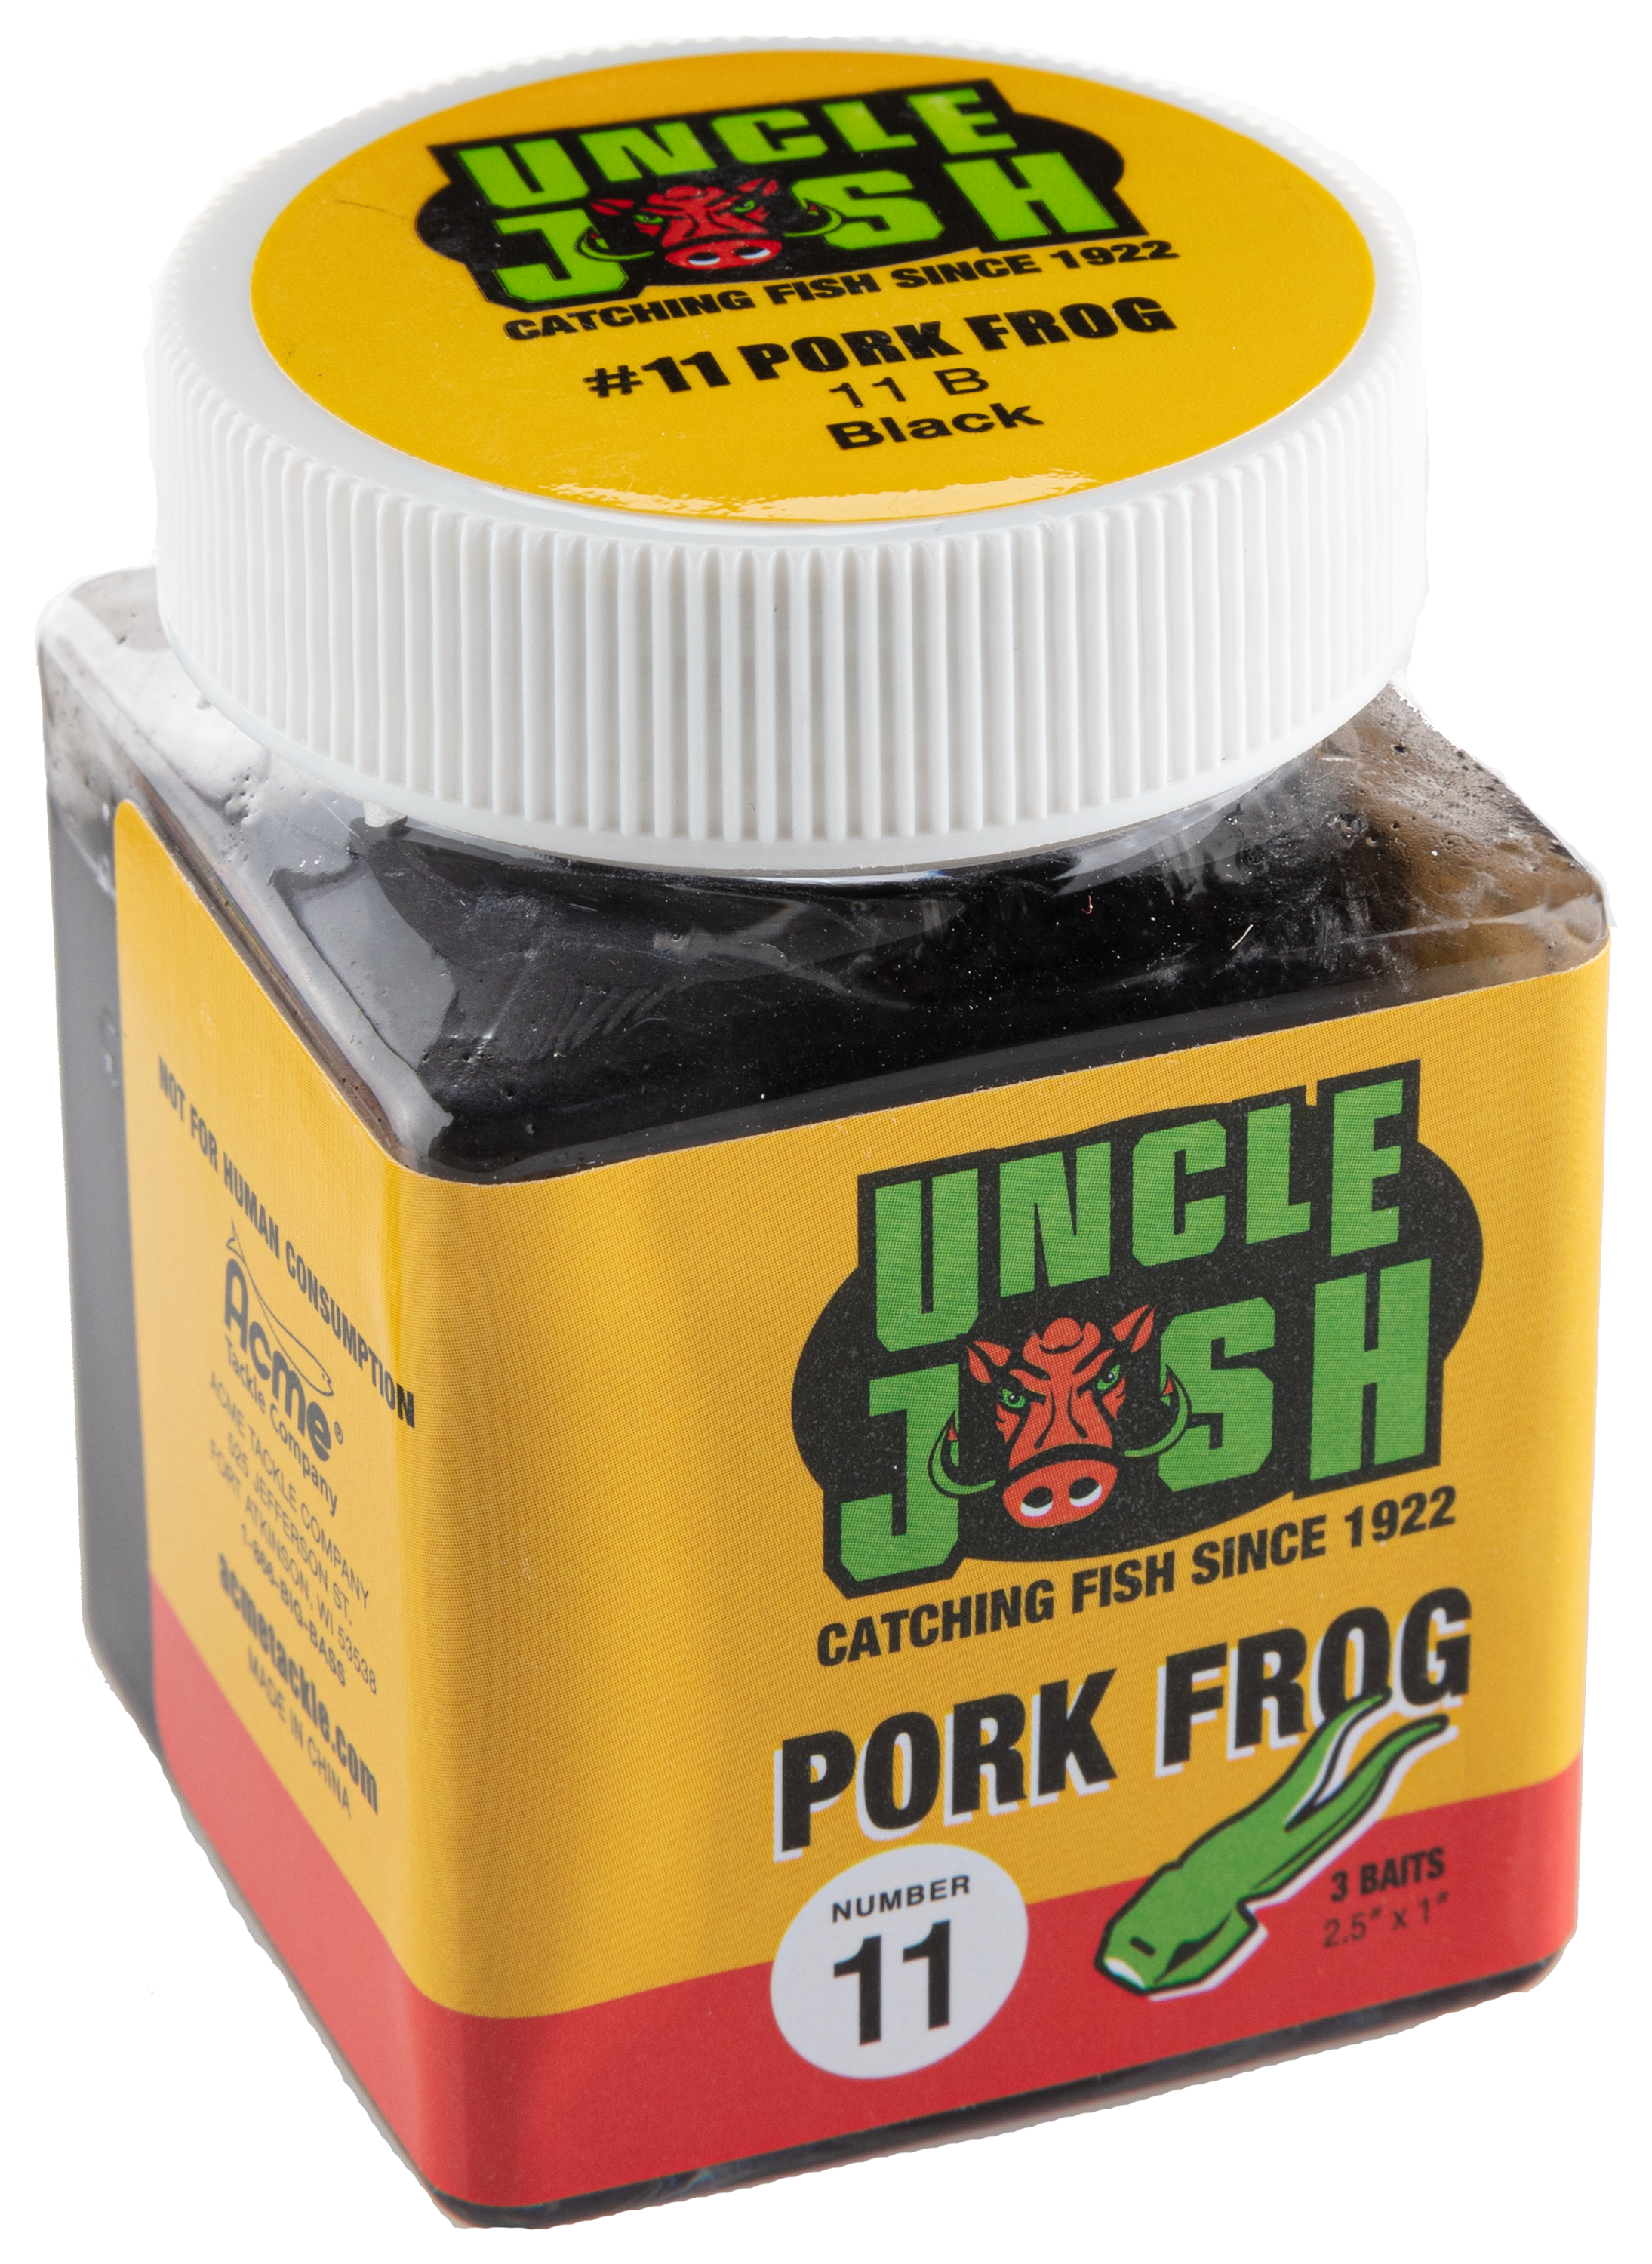 Uncle Josh pork frogs - 7 jars - looking to trade for strips